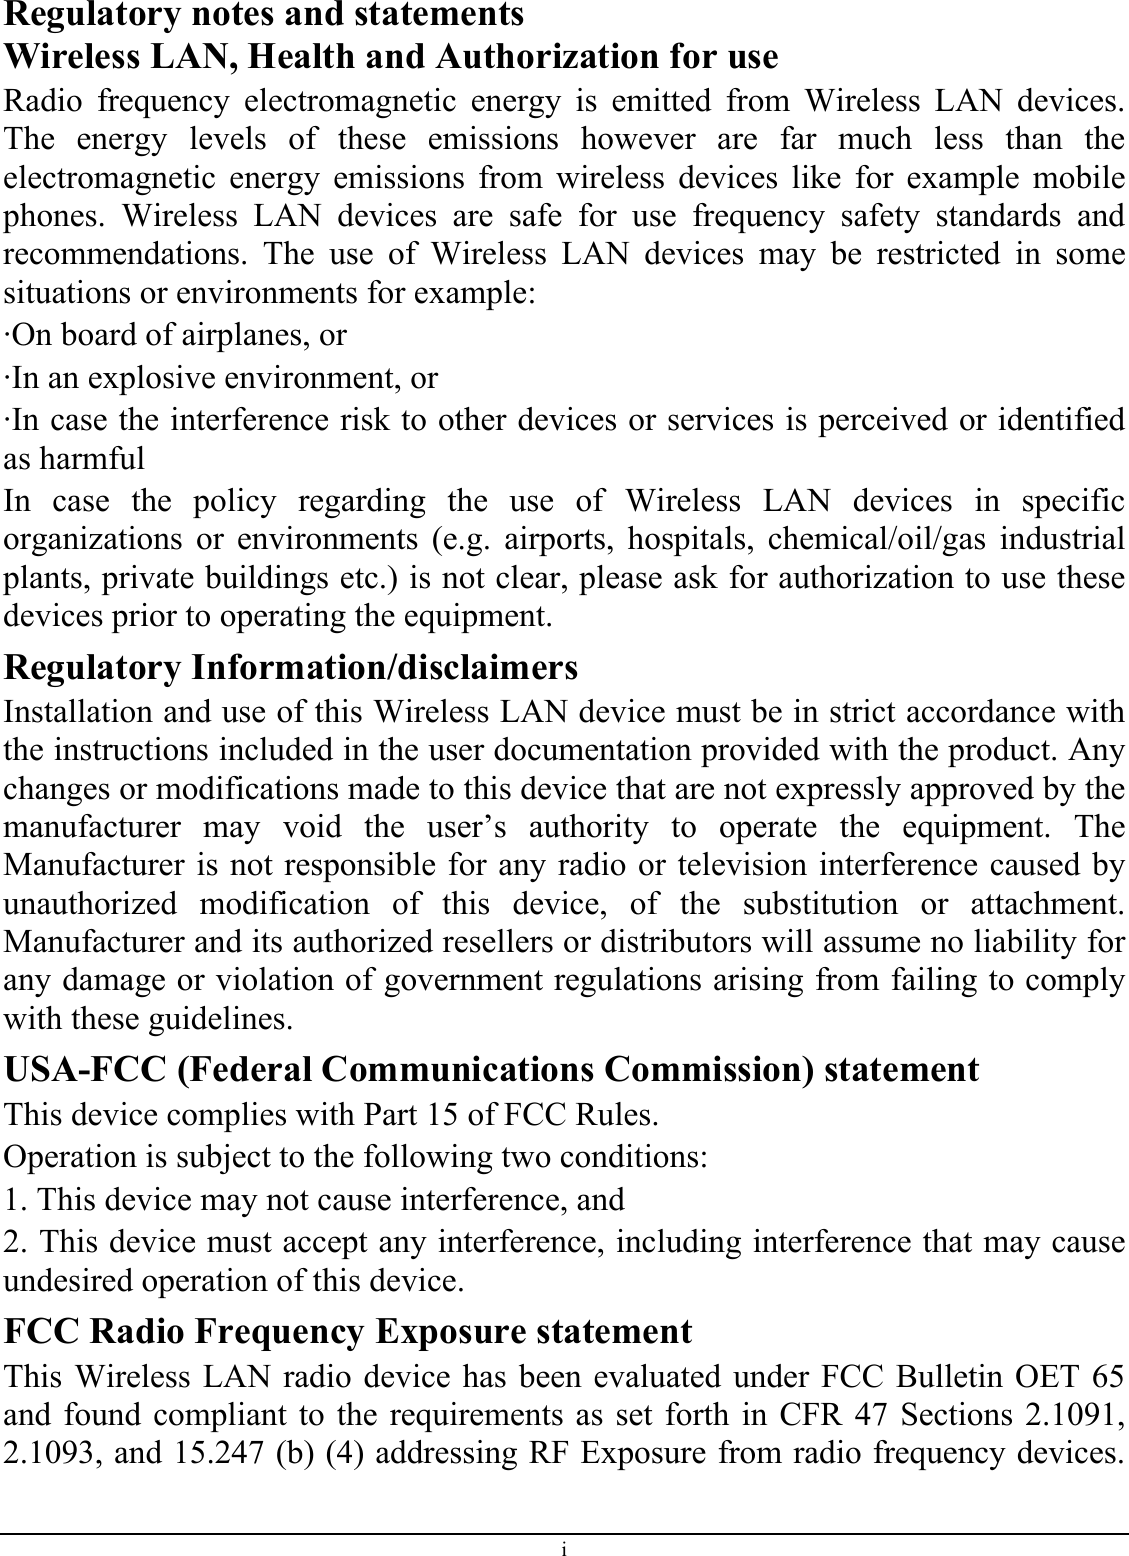 Regulatory notes and statements Wireless LAN, Health and Authorization for use Radio frequency electromagnetic energy is emitted from Wireless LAN devices.The energy levels of these emissions however are far much less than the electromagnetic energy emissions from wireless devices like for example mobile phones. Wireless LAN devices are safe for use frequency safety standards and recommendations. The use of Wireless LAN devices may be restricted in somesituations or environments for example: ·On board of airplanes, or ·In an explosive environment, or ·In case the interference risk to other devices or services is perceived or identified as harmful In case the policy regarding the use of Wireless LAN devices in specific organizations or environments (e.g. airports, hospitals, chemical/oil/gas industrial plants, private buildings etc.) is not clear, please ask for authorization to use these devices prior to operating the equipment. Regulatory Information/disclaimers Installation and use of this Wireless LAN device must be in strict accordance with the instructions included in the user documentation provided with the product. Any changes or modifications made to this device that are not expressly approved by the manufacturer may void the user’s authority to operate the equipment. The Manufacturer is not responsible for any radio or television interference caused by unauthorized modification of this device, of the substitution or attachment. Manufacturer and its authorized resellers or distributors will assume no liability for any damage or violation of government regulations arising from failing to comply with these guidelines. USA-FCC (Federal Communications Commission) statement This device complies with Part 15 of FCC Rules. Operation is subject to the following two conditions: 1. This device may not cause interference, and 2. This device must accept any interference, including interference that may cause undesired operation of this device. FCC Radio Frequency Exposure statement This Wireless LAN radio device has been evaluated under FCC Bulletin OET 65 and found compliant to the requirements as set forth in CFR 47 Sections 2.1091, 2.1093, and 15.247 (b) (4) addressing RF Exposure from radio frequency devices.i